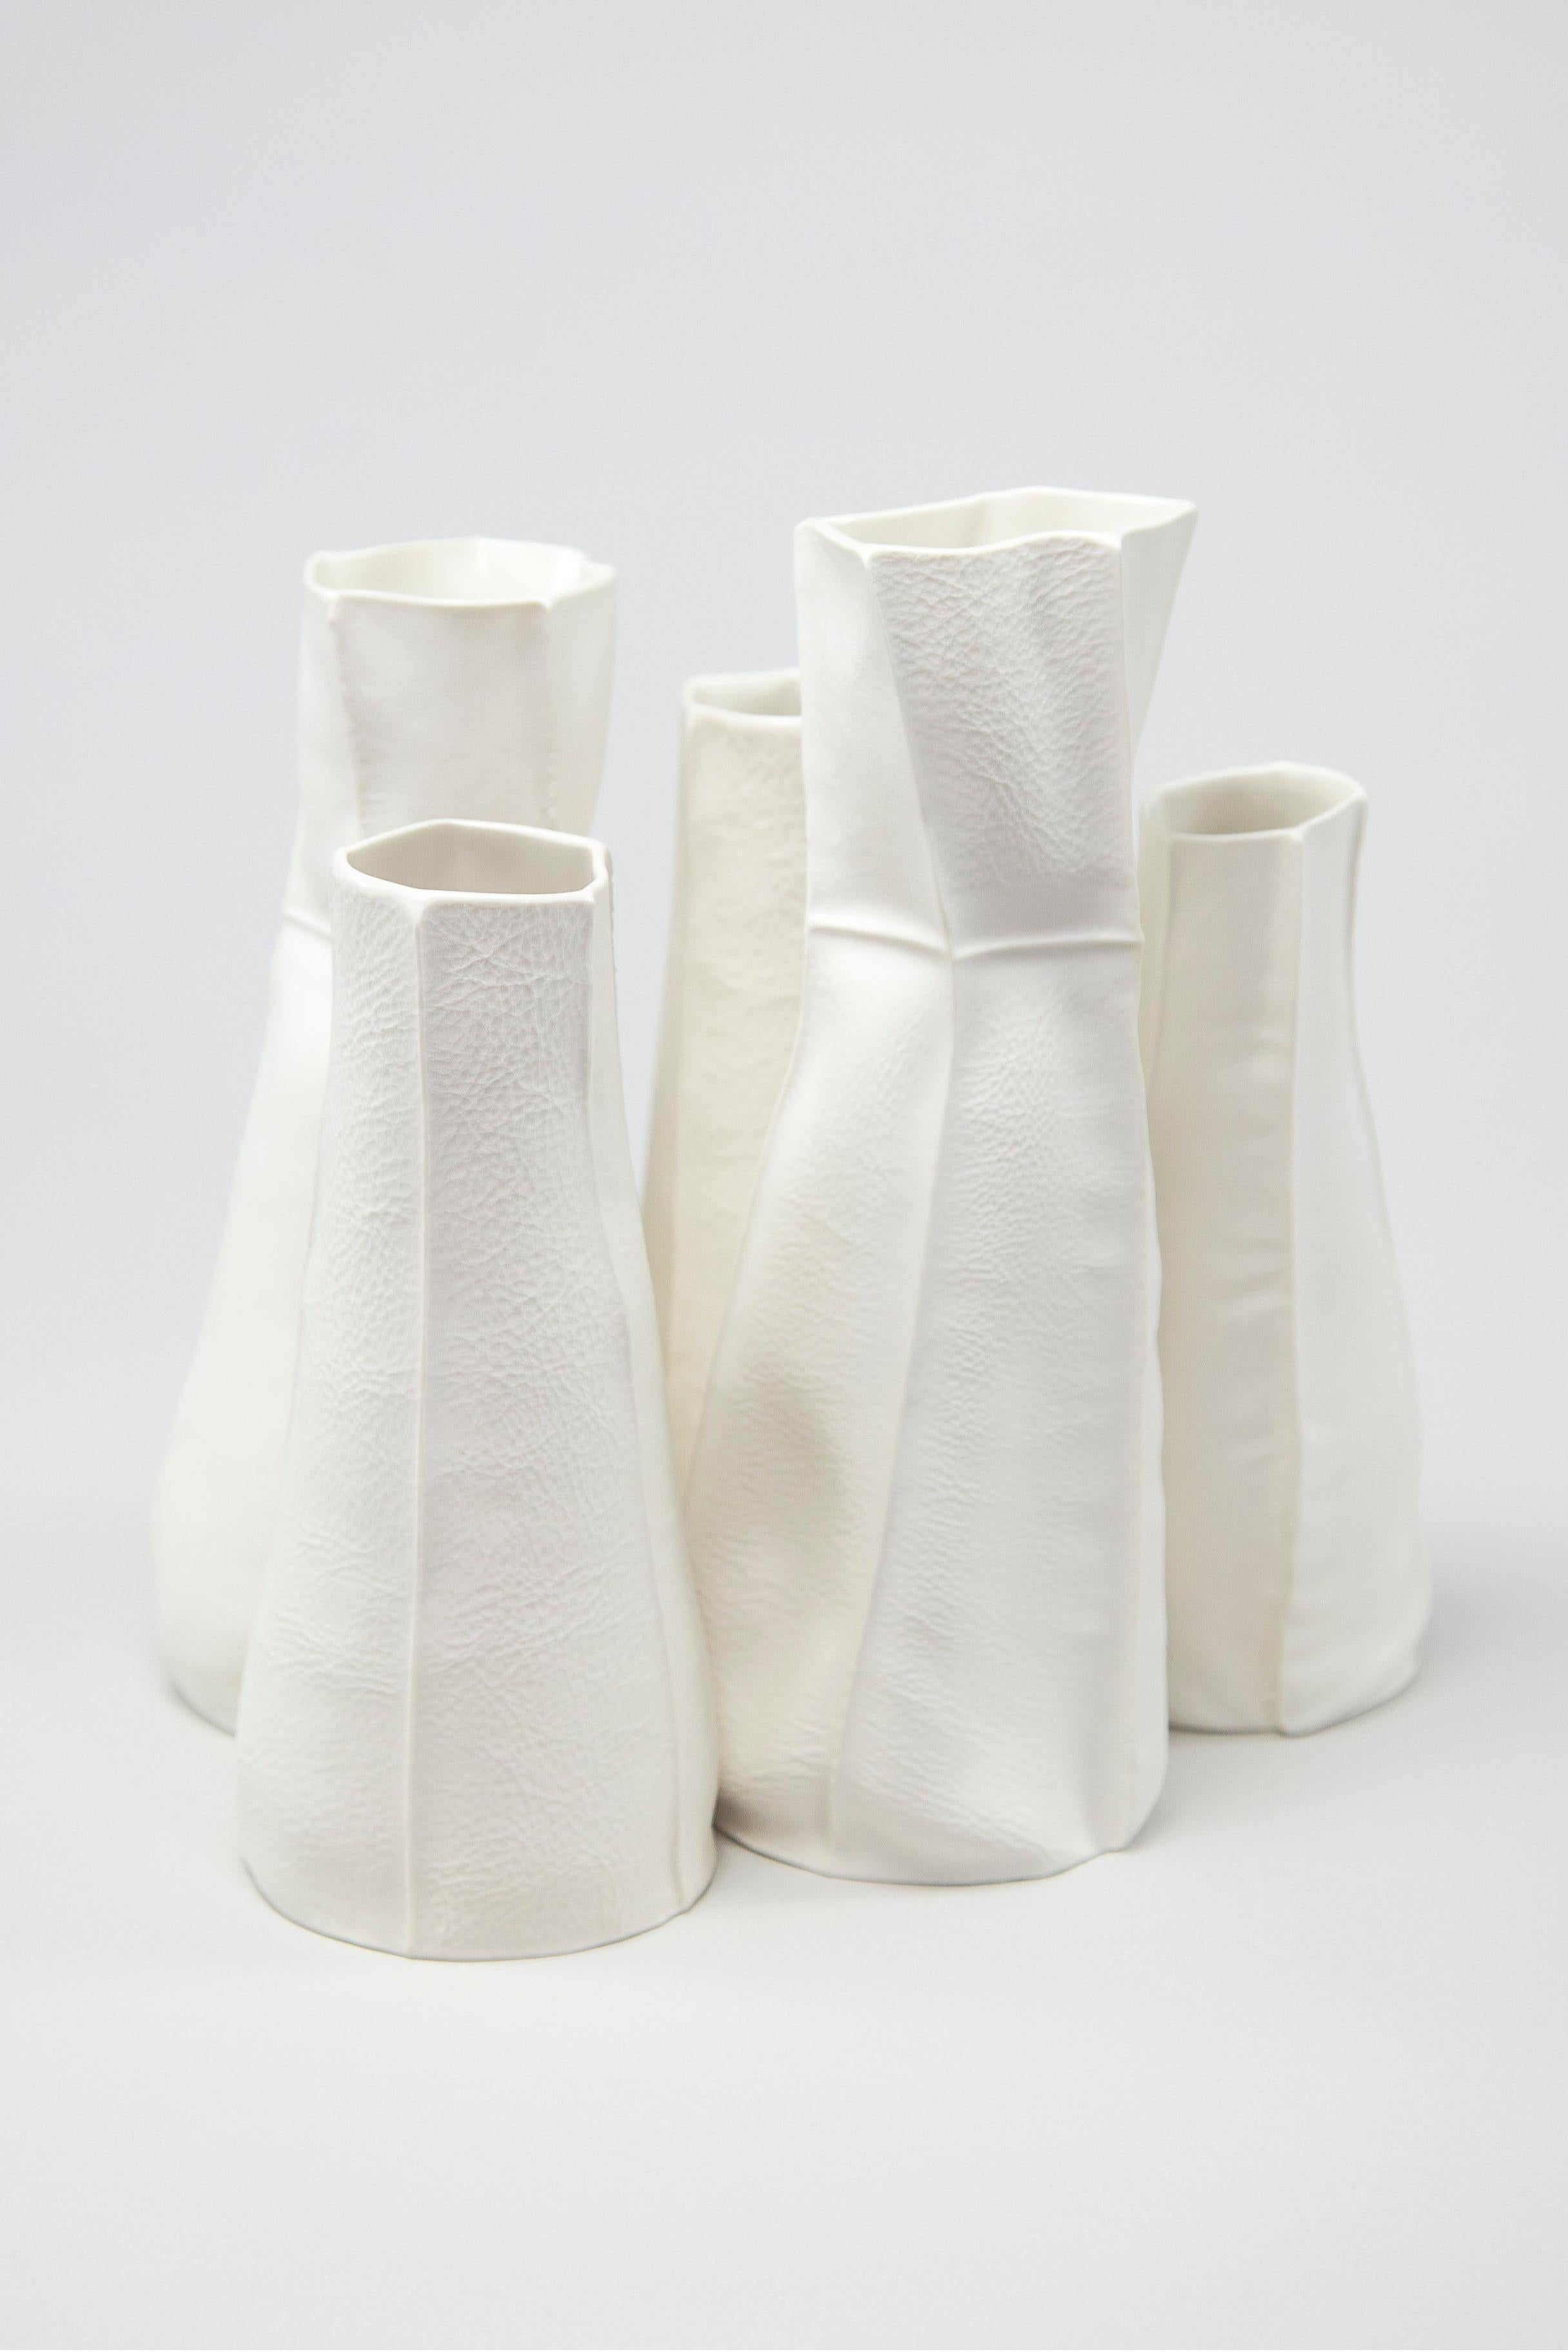 American White Ceramic Pair Kawa Vases by Luft Tanaka, Leather Cast Porcelain Kawa Series For Sale